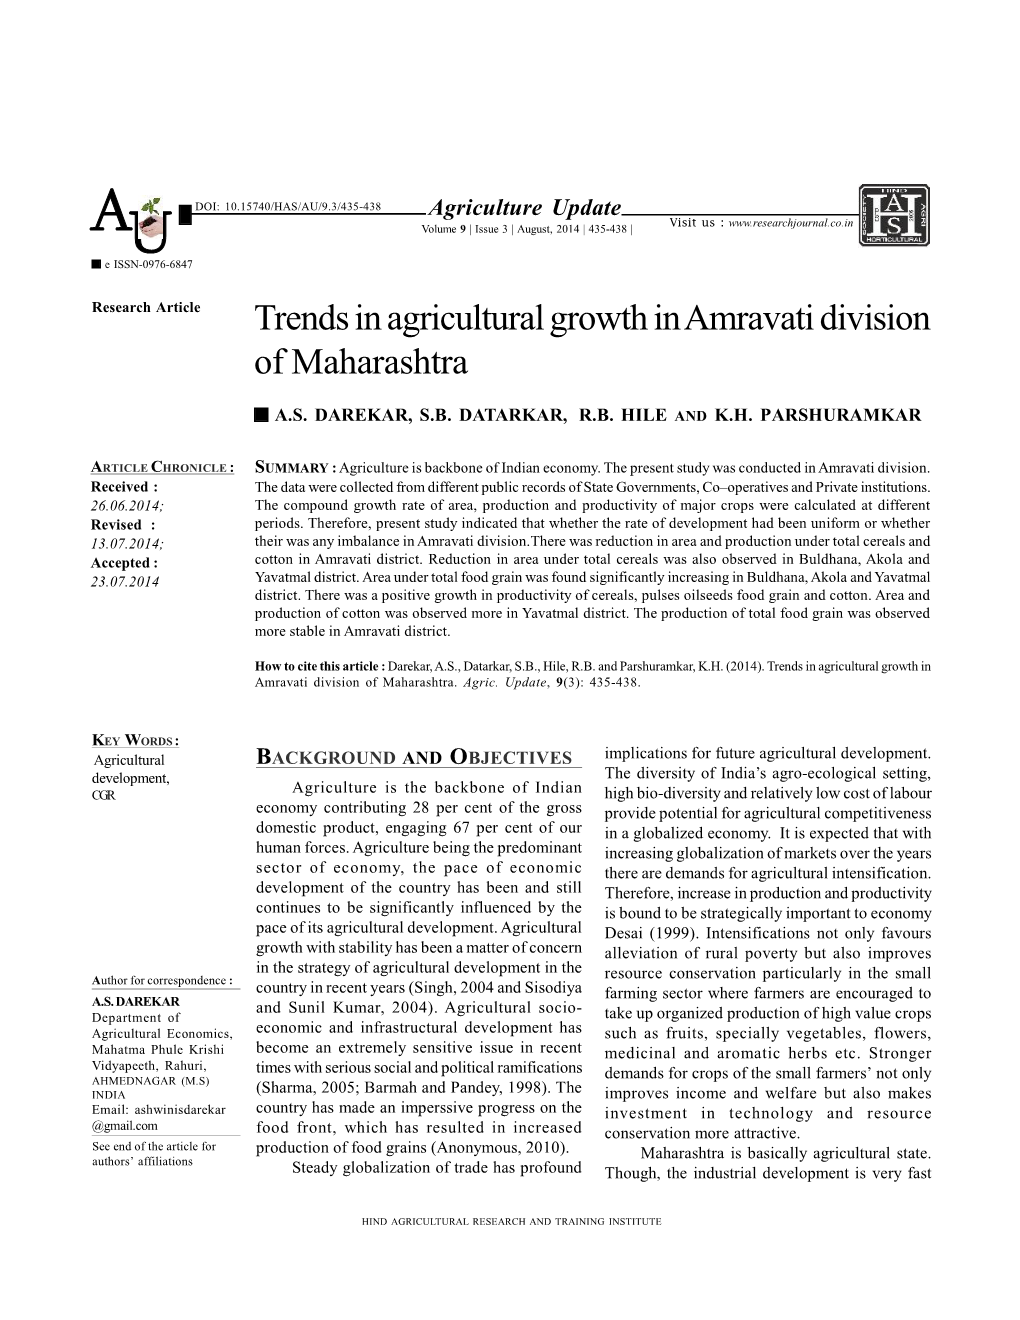 Trends in Agricultural Growth in Amravati Division of Maharashtra